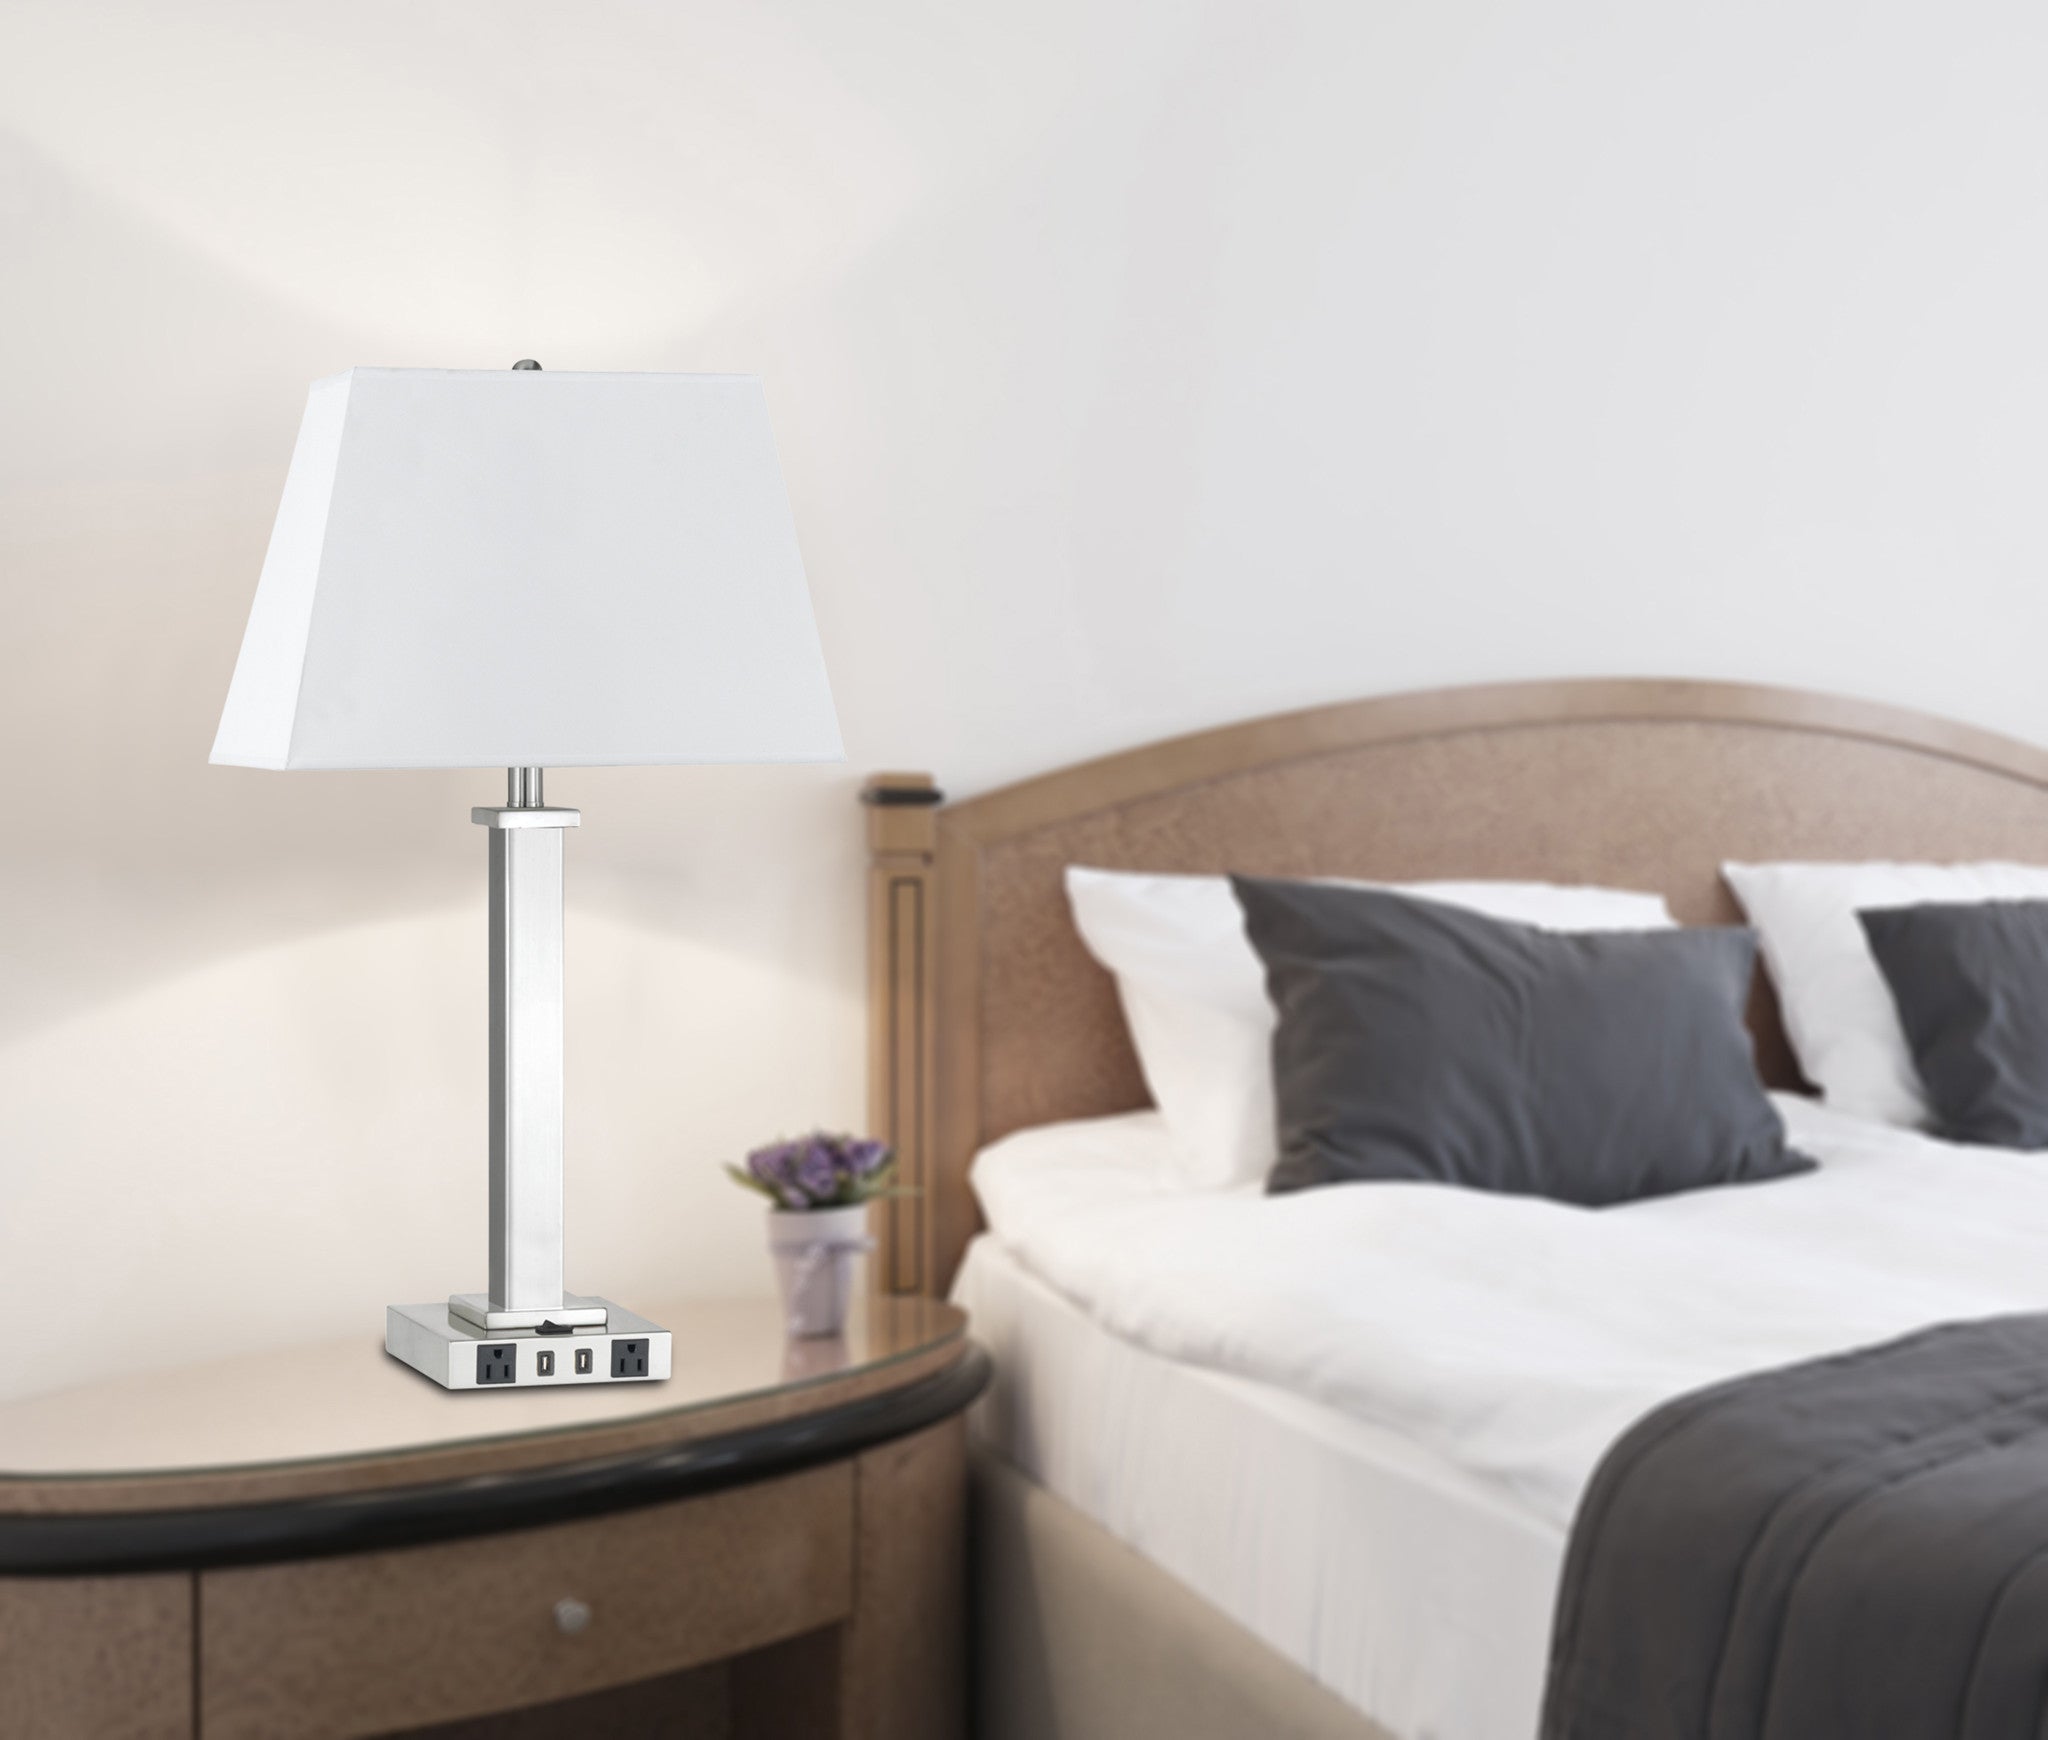 28" Nickel Metal USB Table Lamp With White Shade